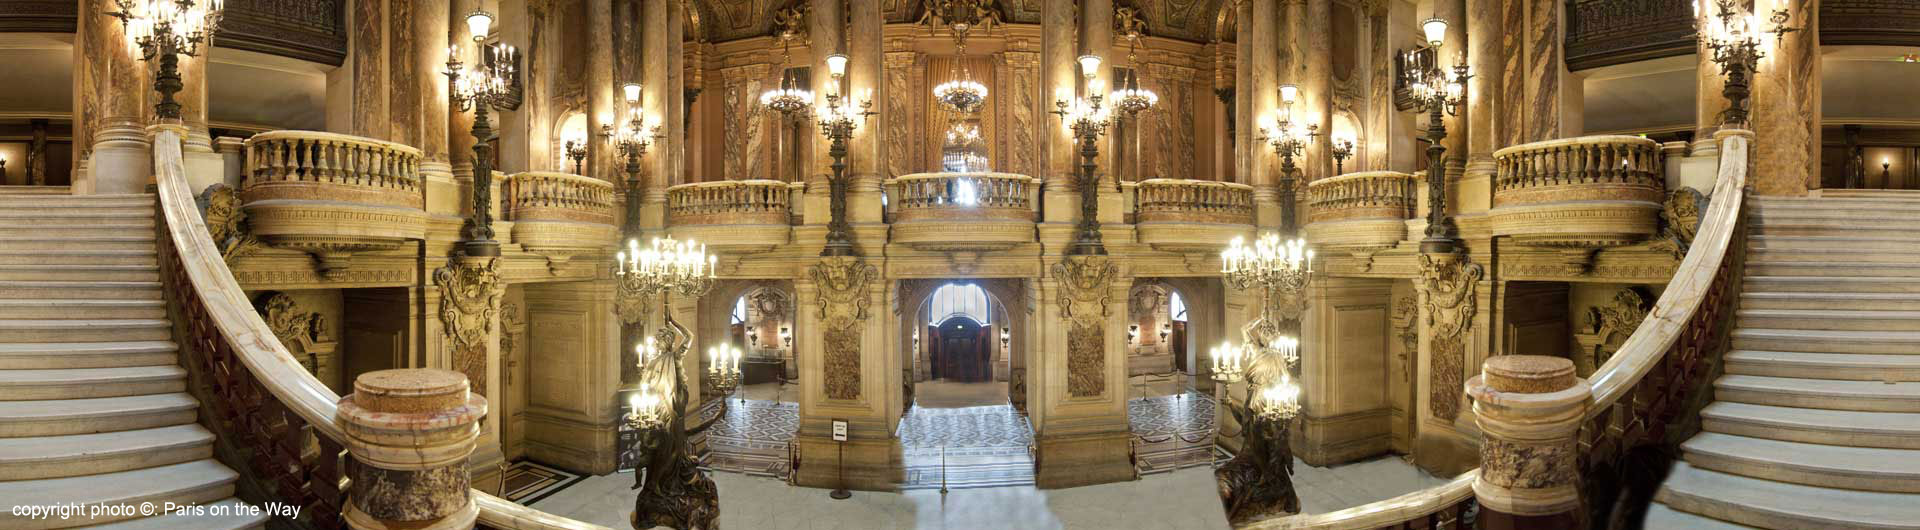 THE OPULENT GRAND STAIRCASE